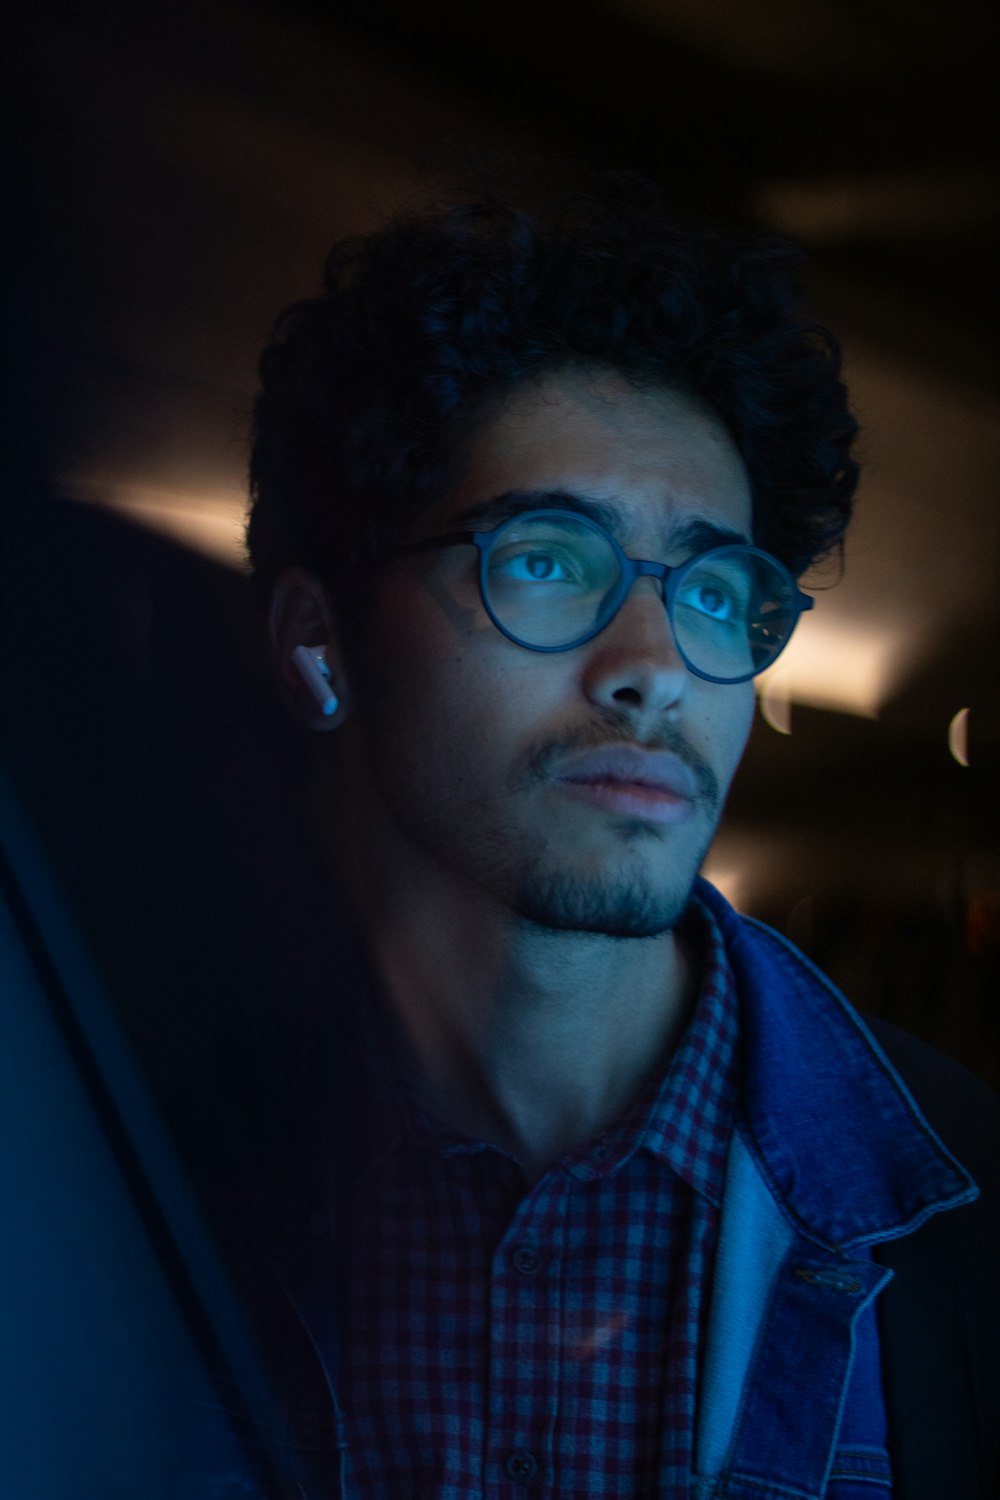 a man wearing glasses and a jacket in a dark room